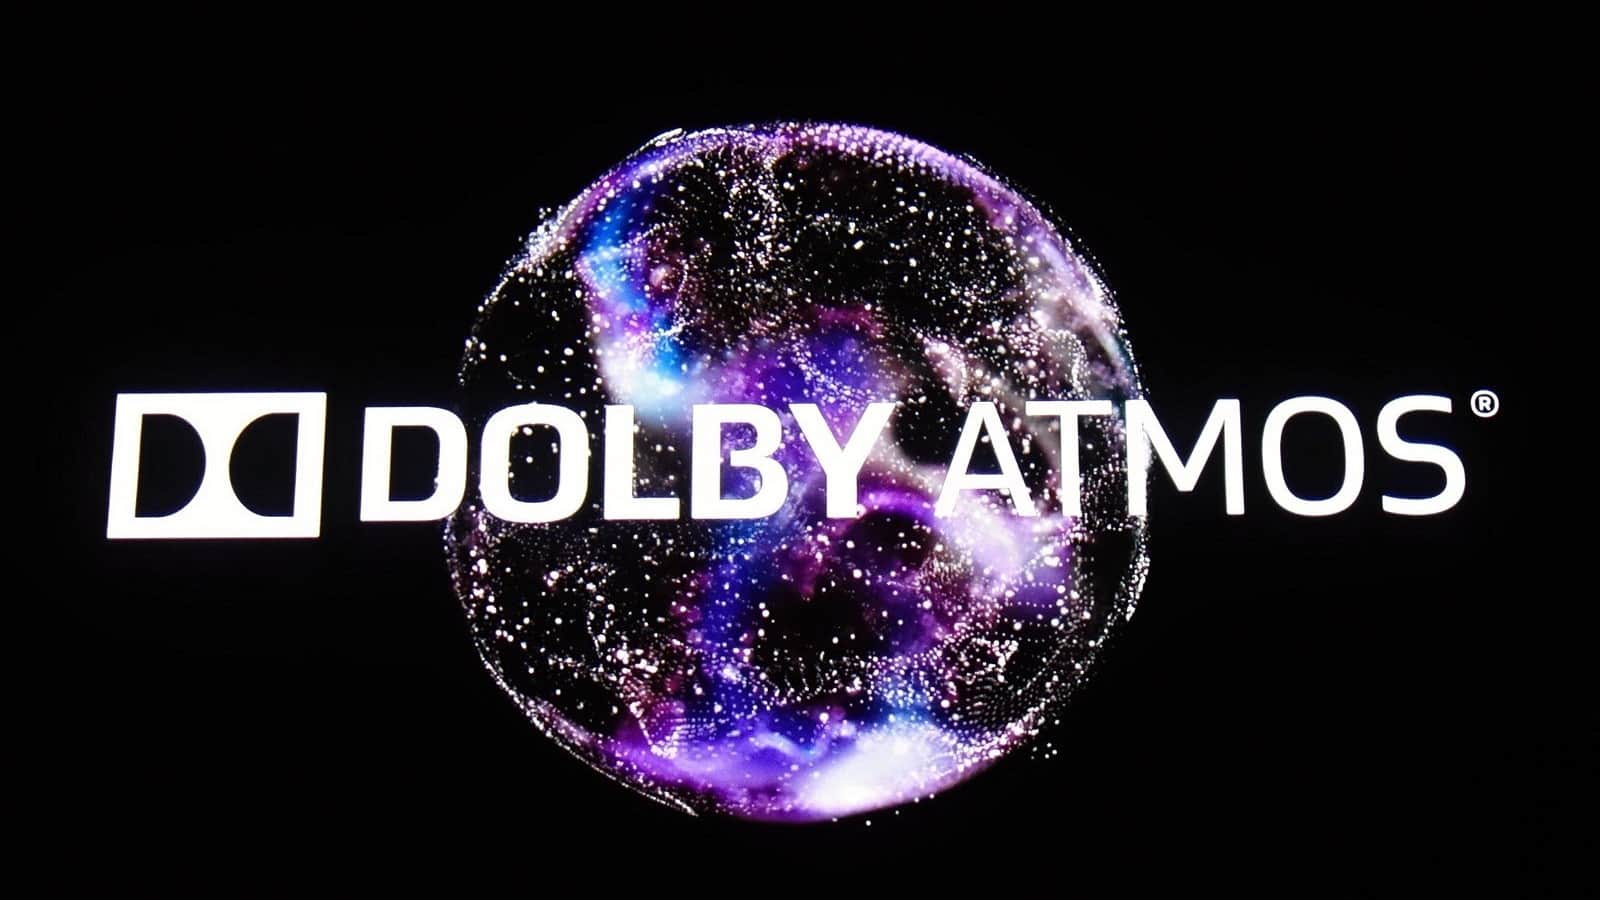 Heard of Dolby Atmos? - Here's everything you need to know about it